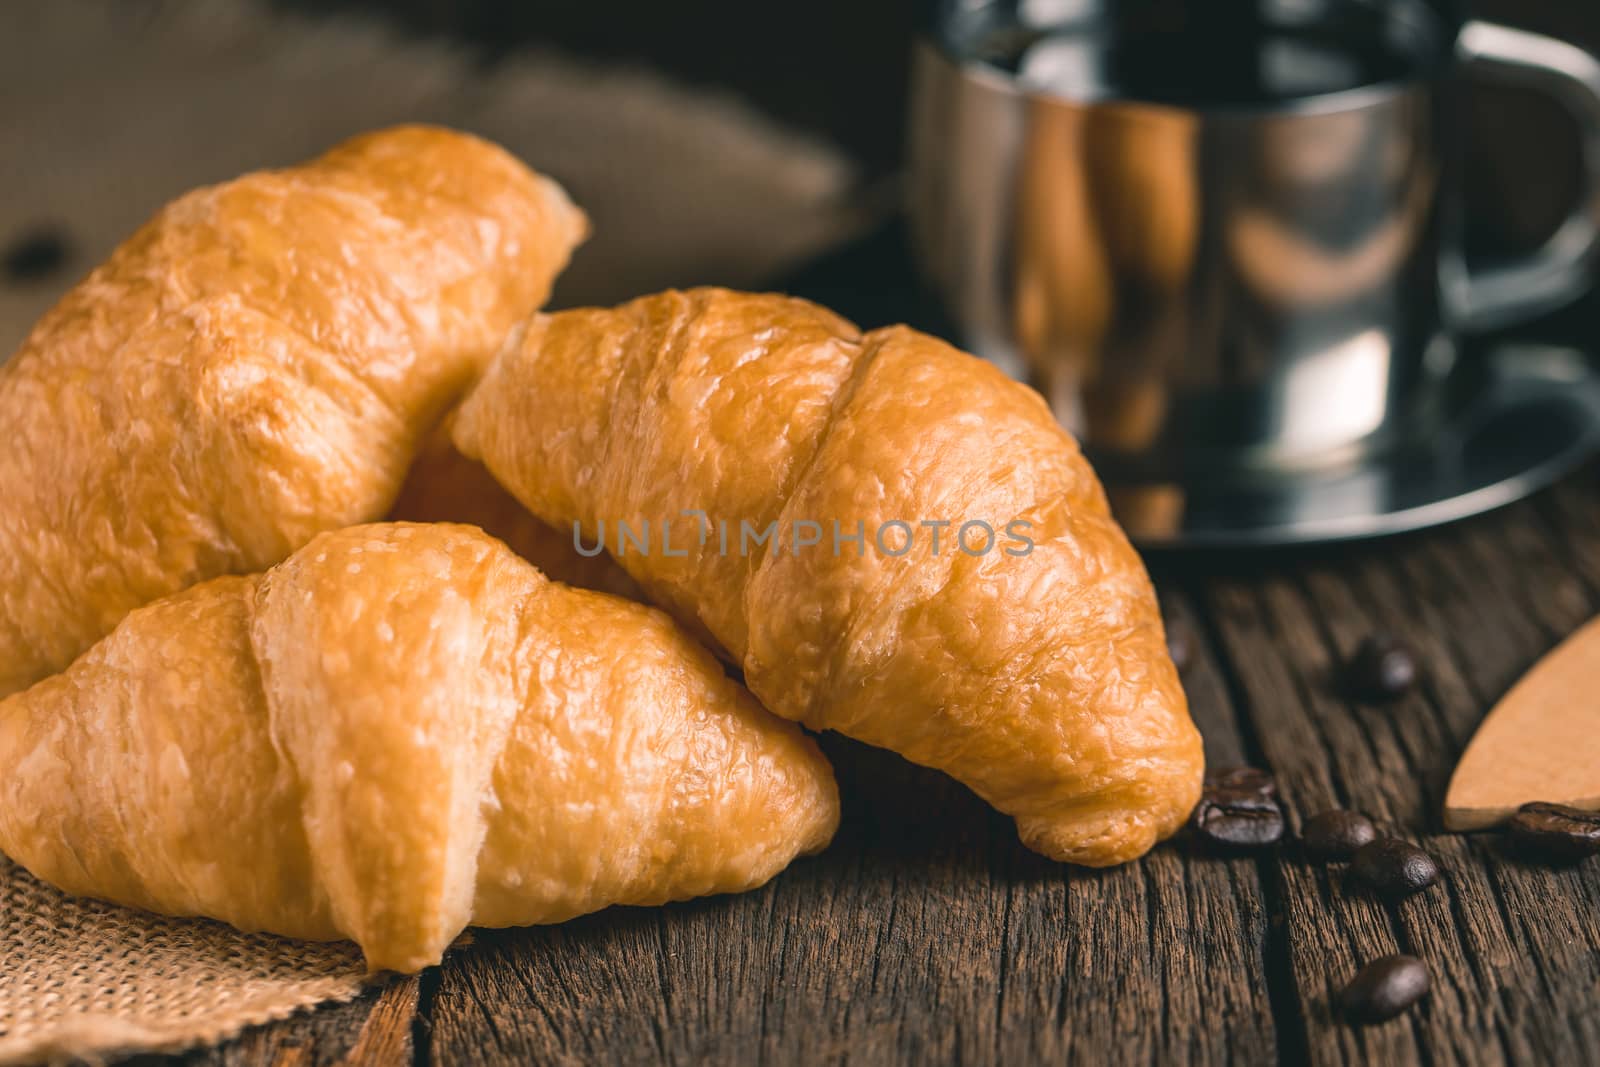 Coffee and croissants on the wooden background, top view by freedomnaruk